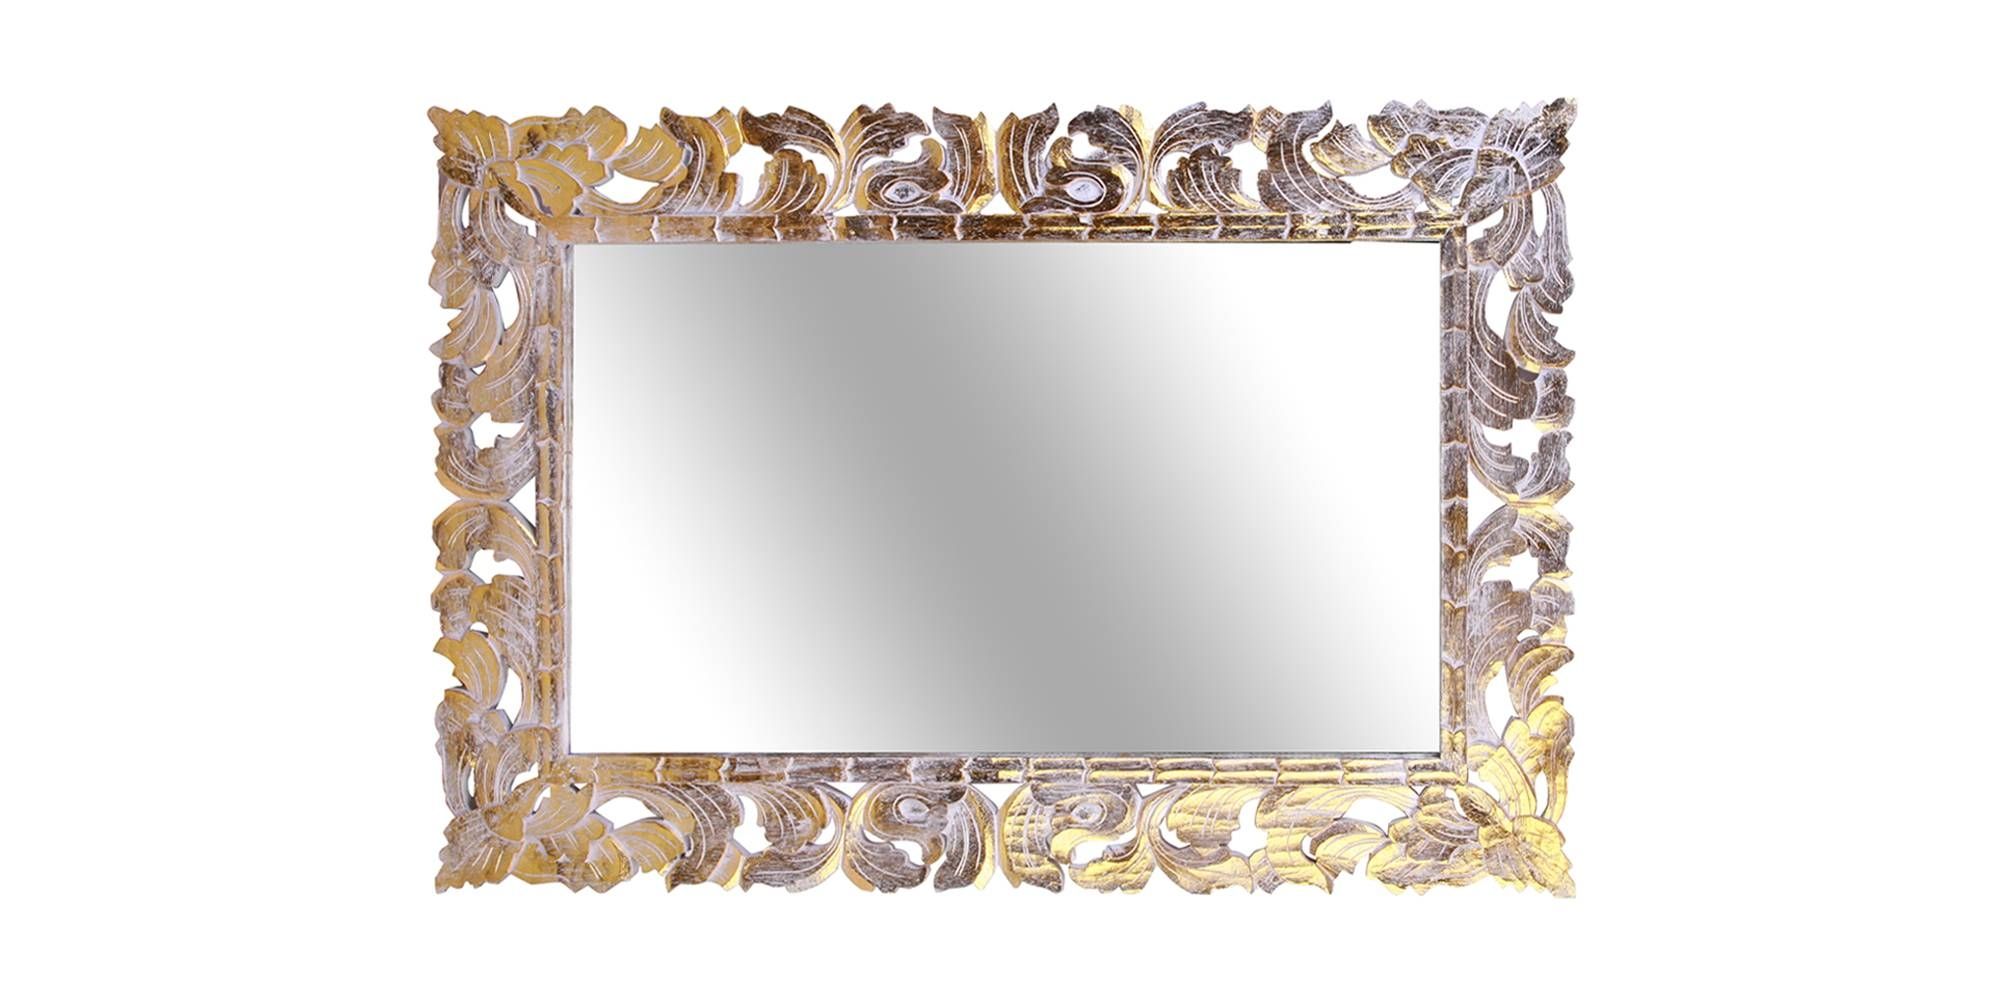 Omnia Craft – Bali – Rectangular Gilded Mirror Pertaining To Gilded Mirrors (View 3 of 25)